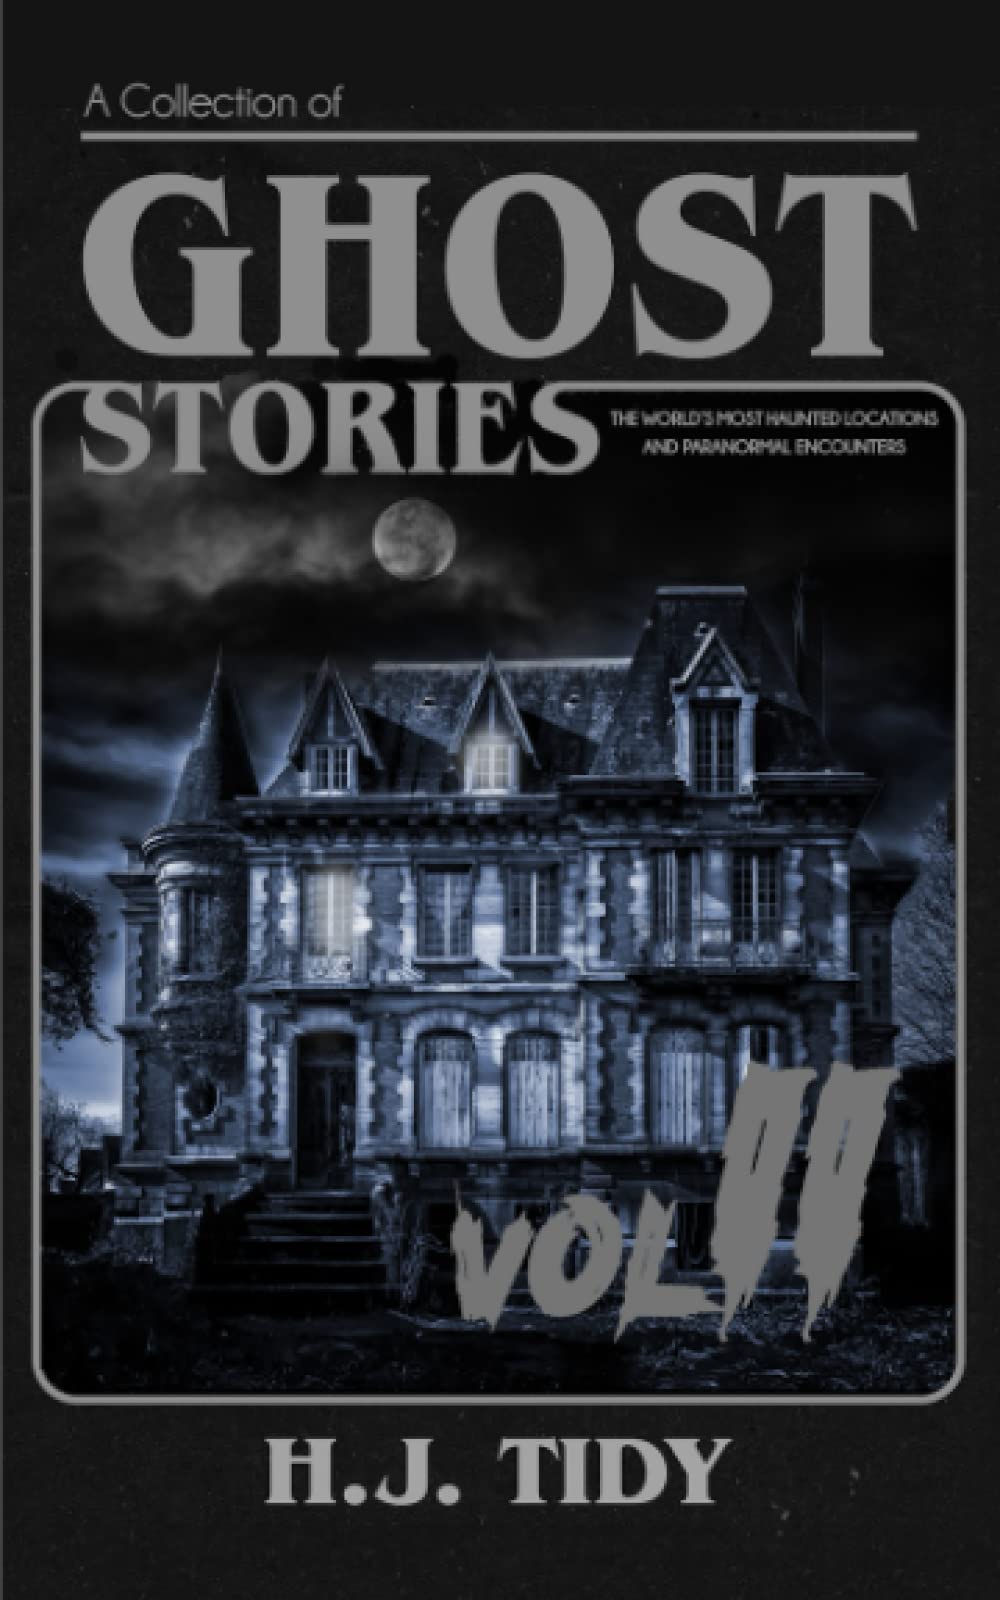 Ghost Stories VOL II: A Collection of the World’s Most Haunted Locations and Paranormal Encounters (PARANORMAL LOCATIONS SERIES)